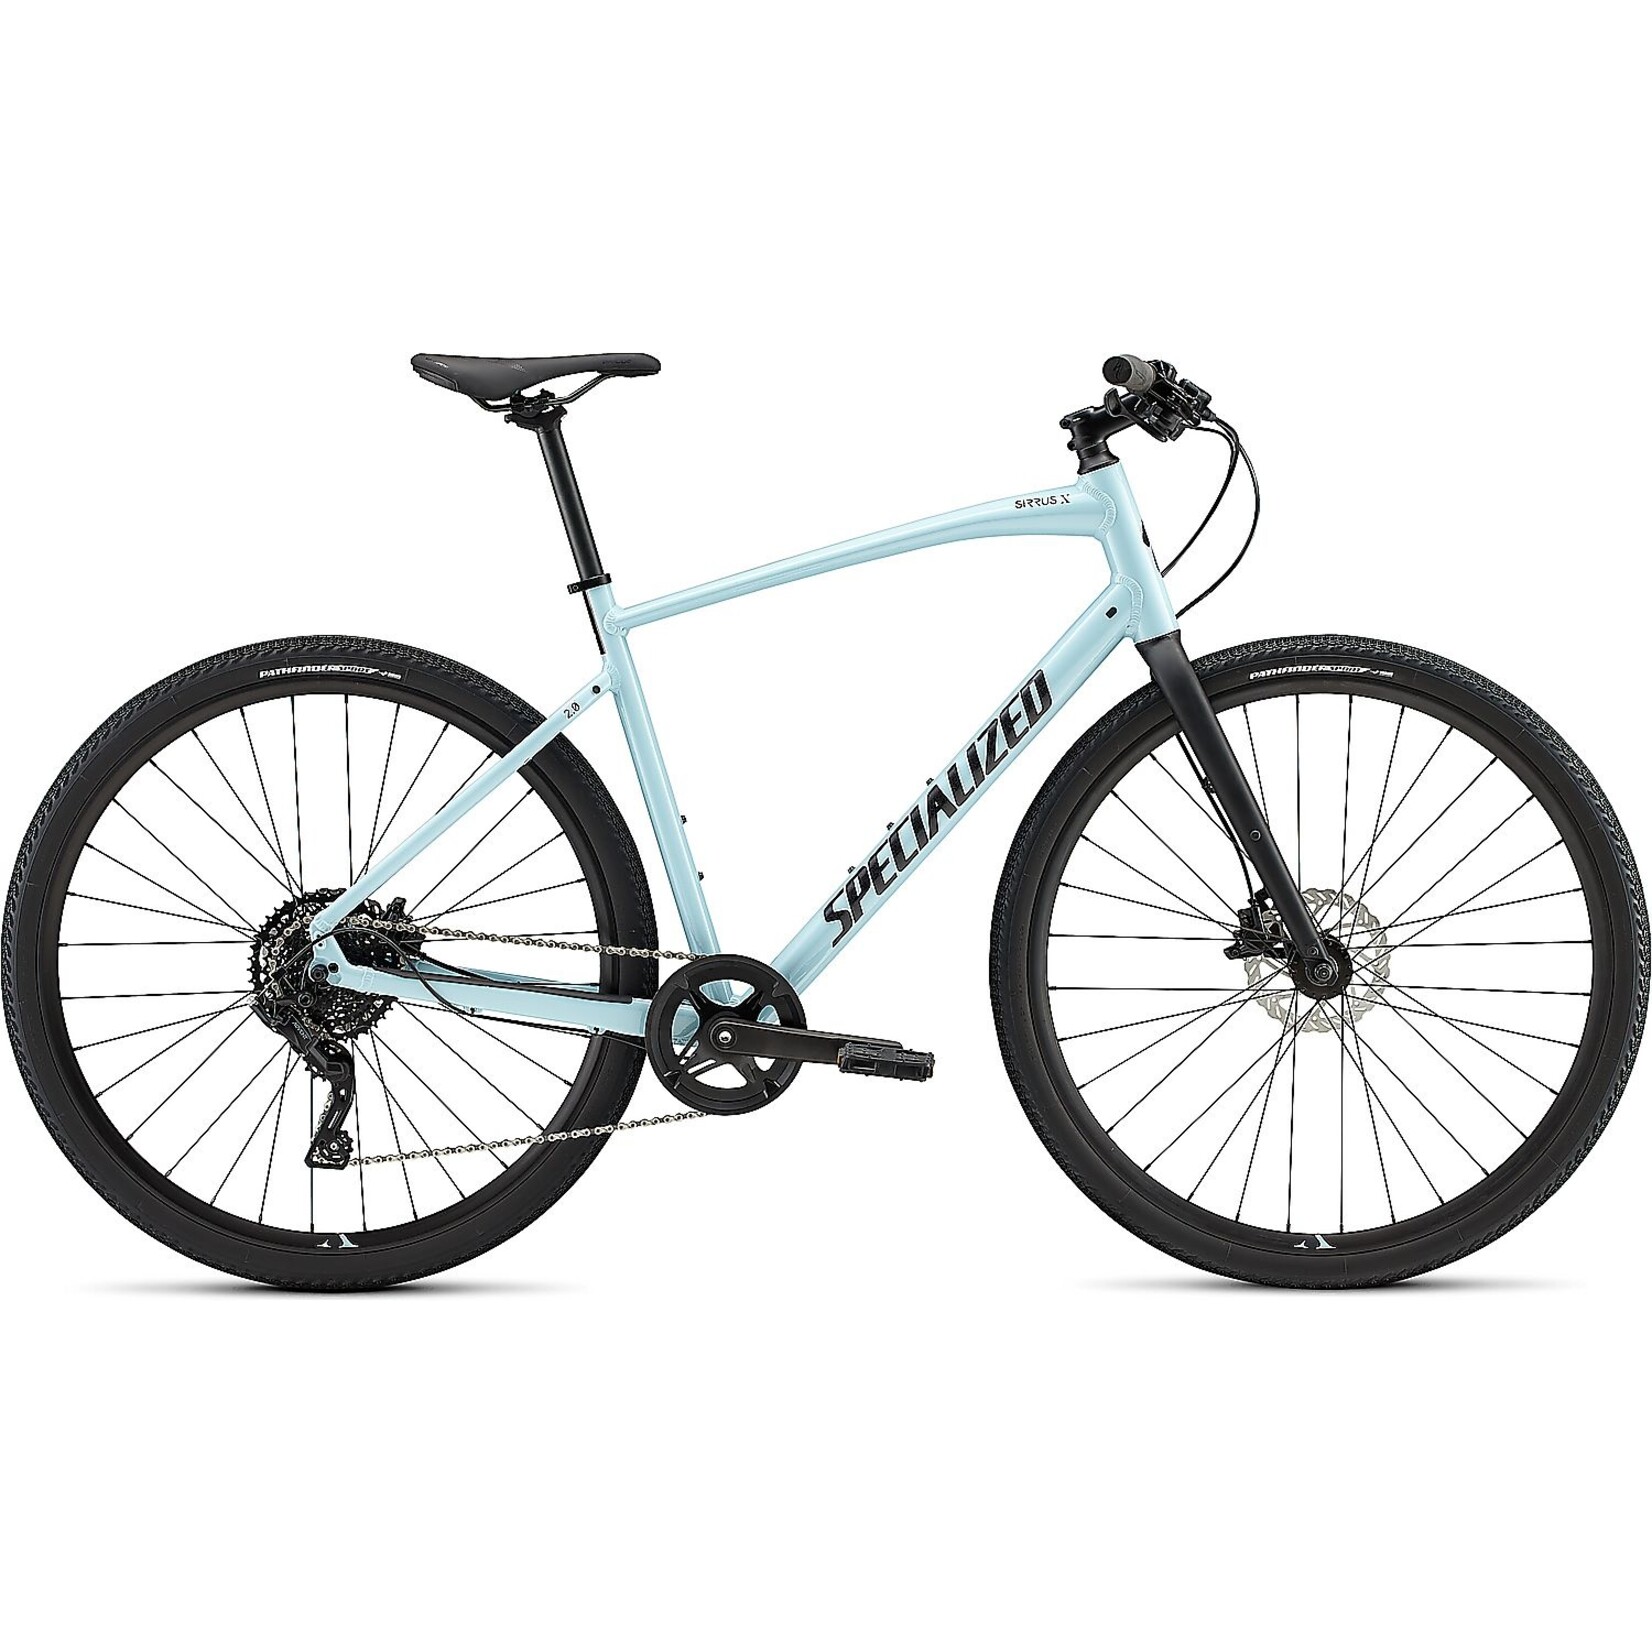 Specialized Sirrus X 2.0 2022 in GLOSS ARCTIC BLUE  BLACK  SATIN BLACK REFLECTIVE